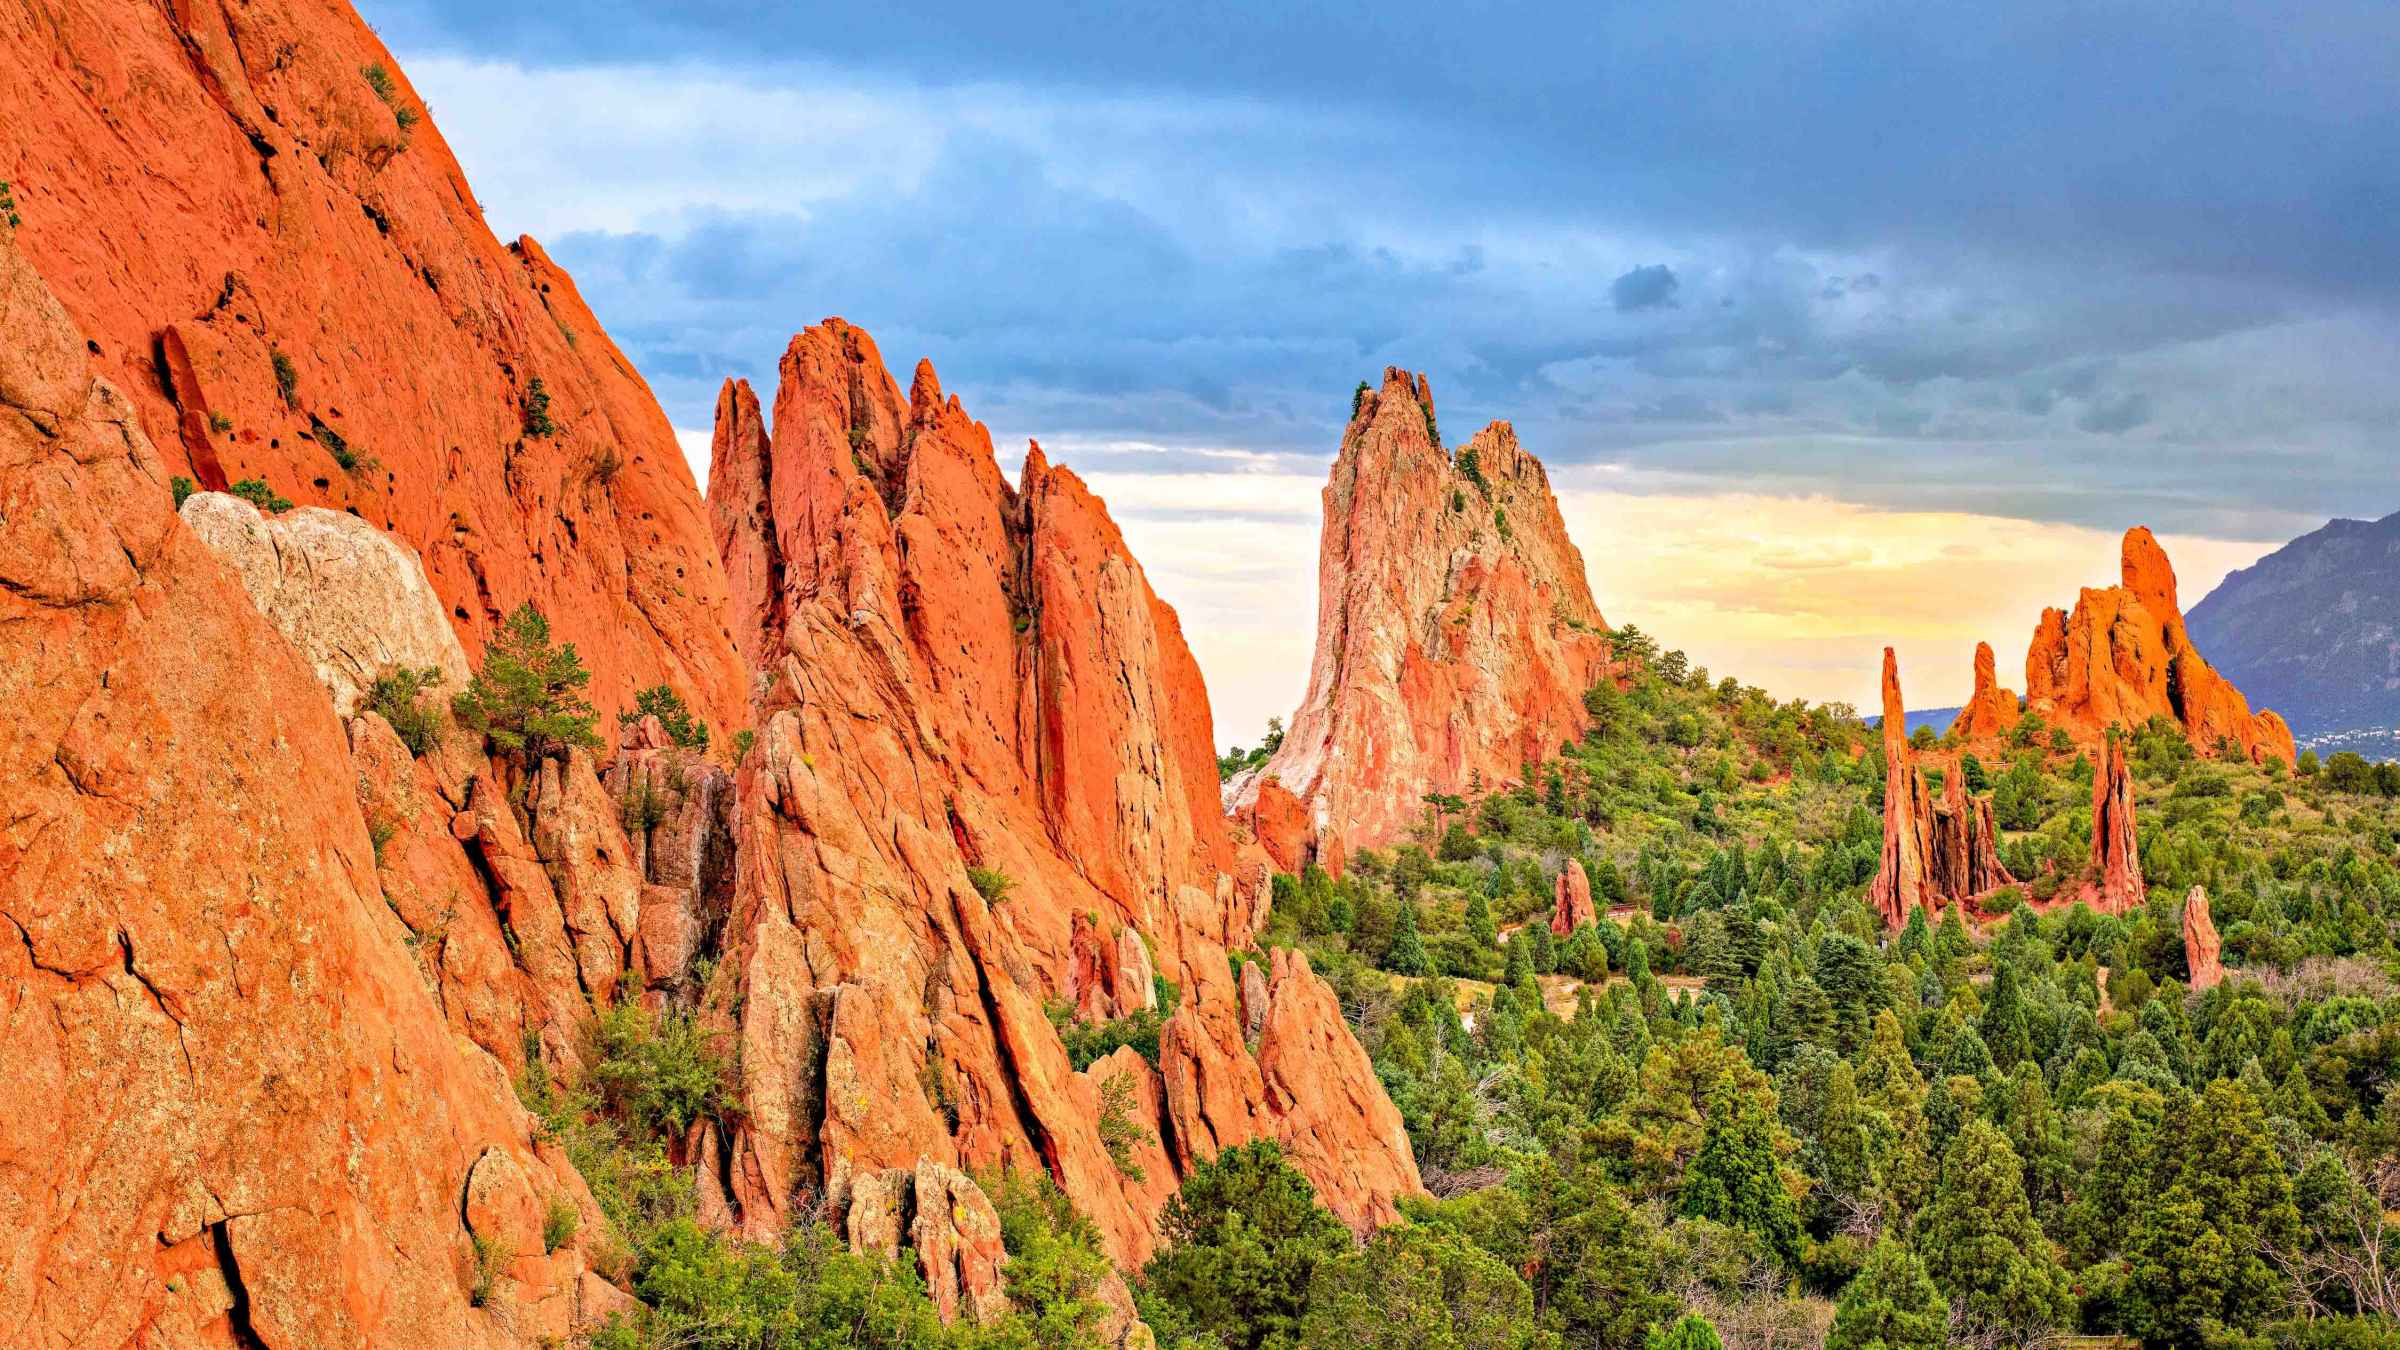 travel packages to colorado springs